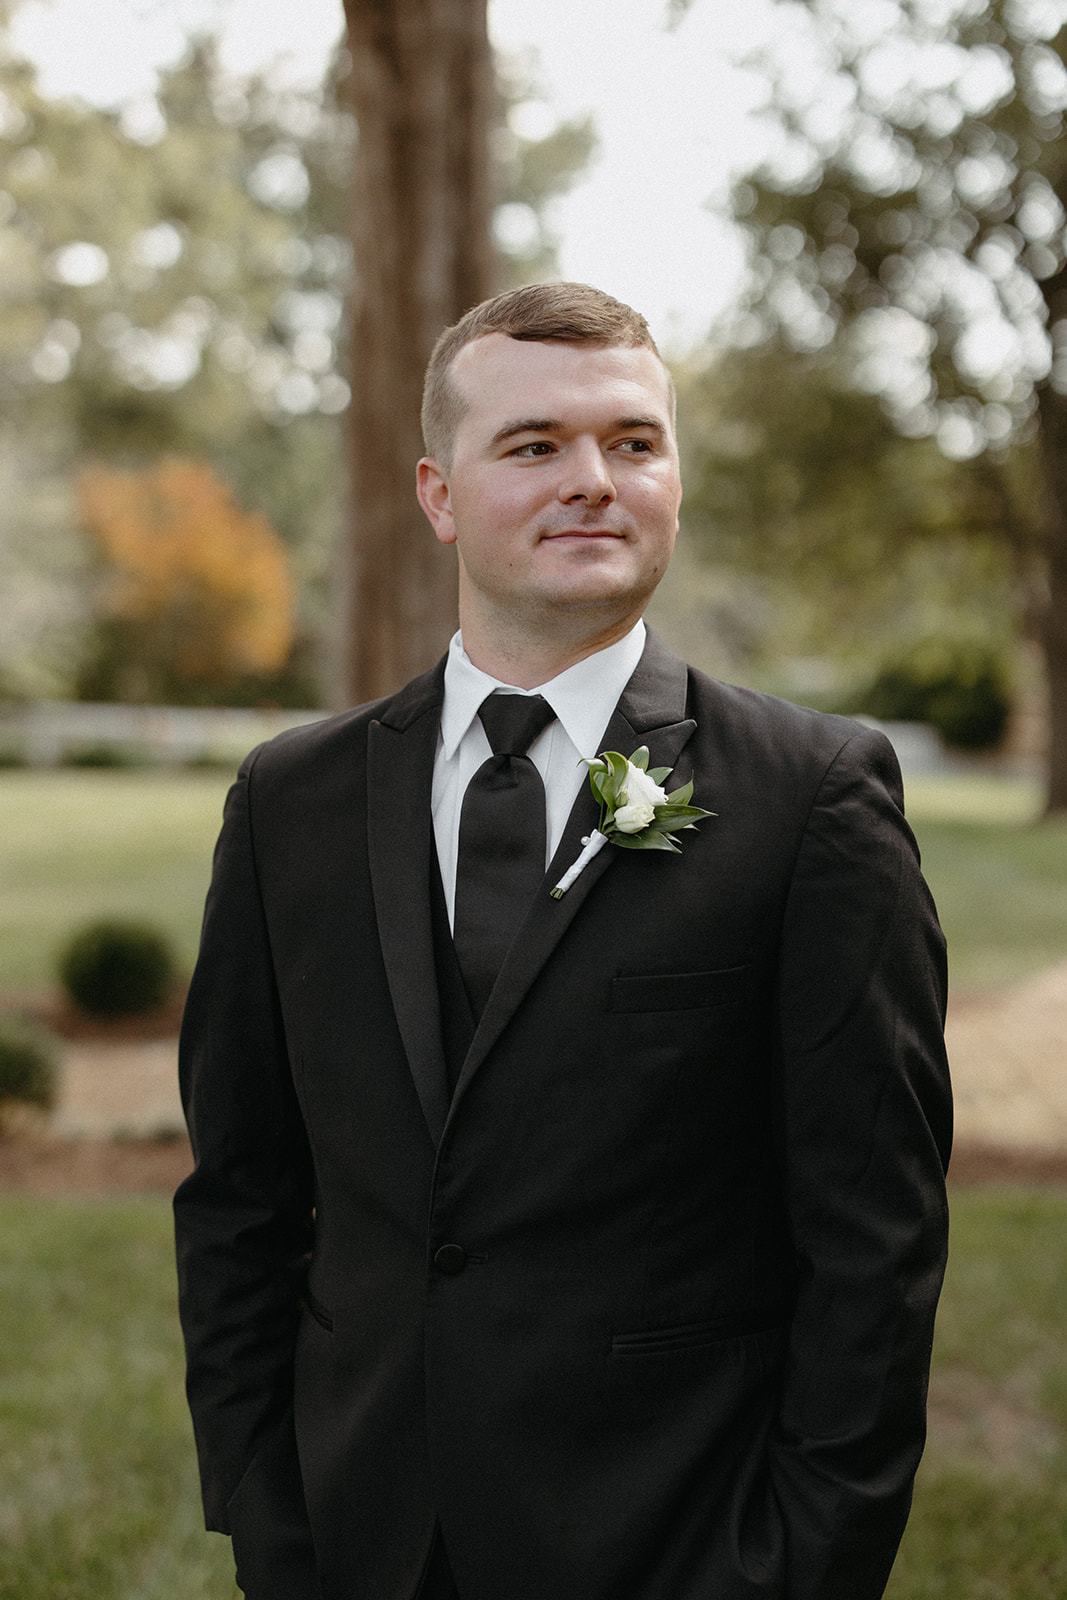 Groom Portrait with White and Green Boutonniere